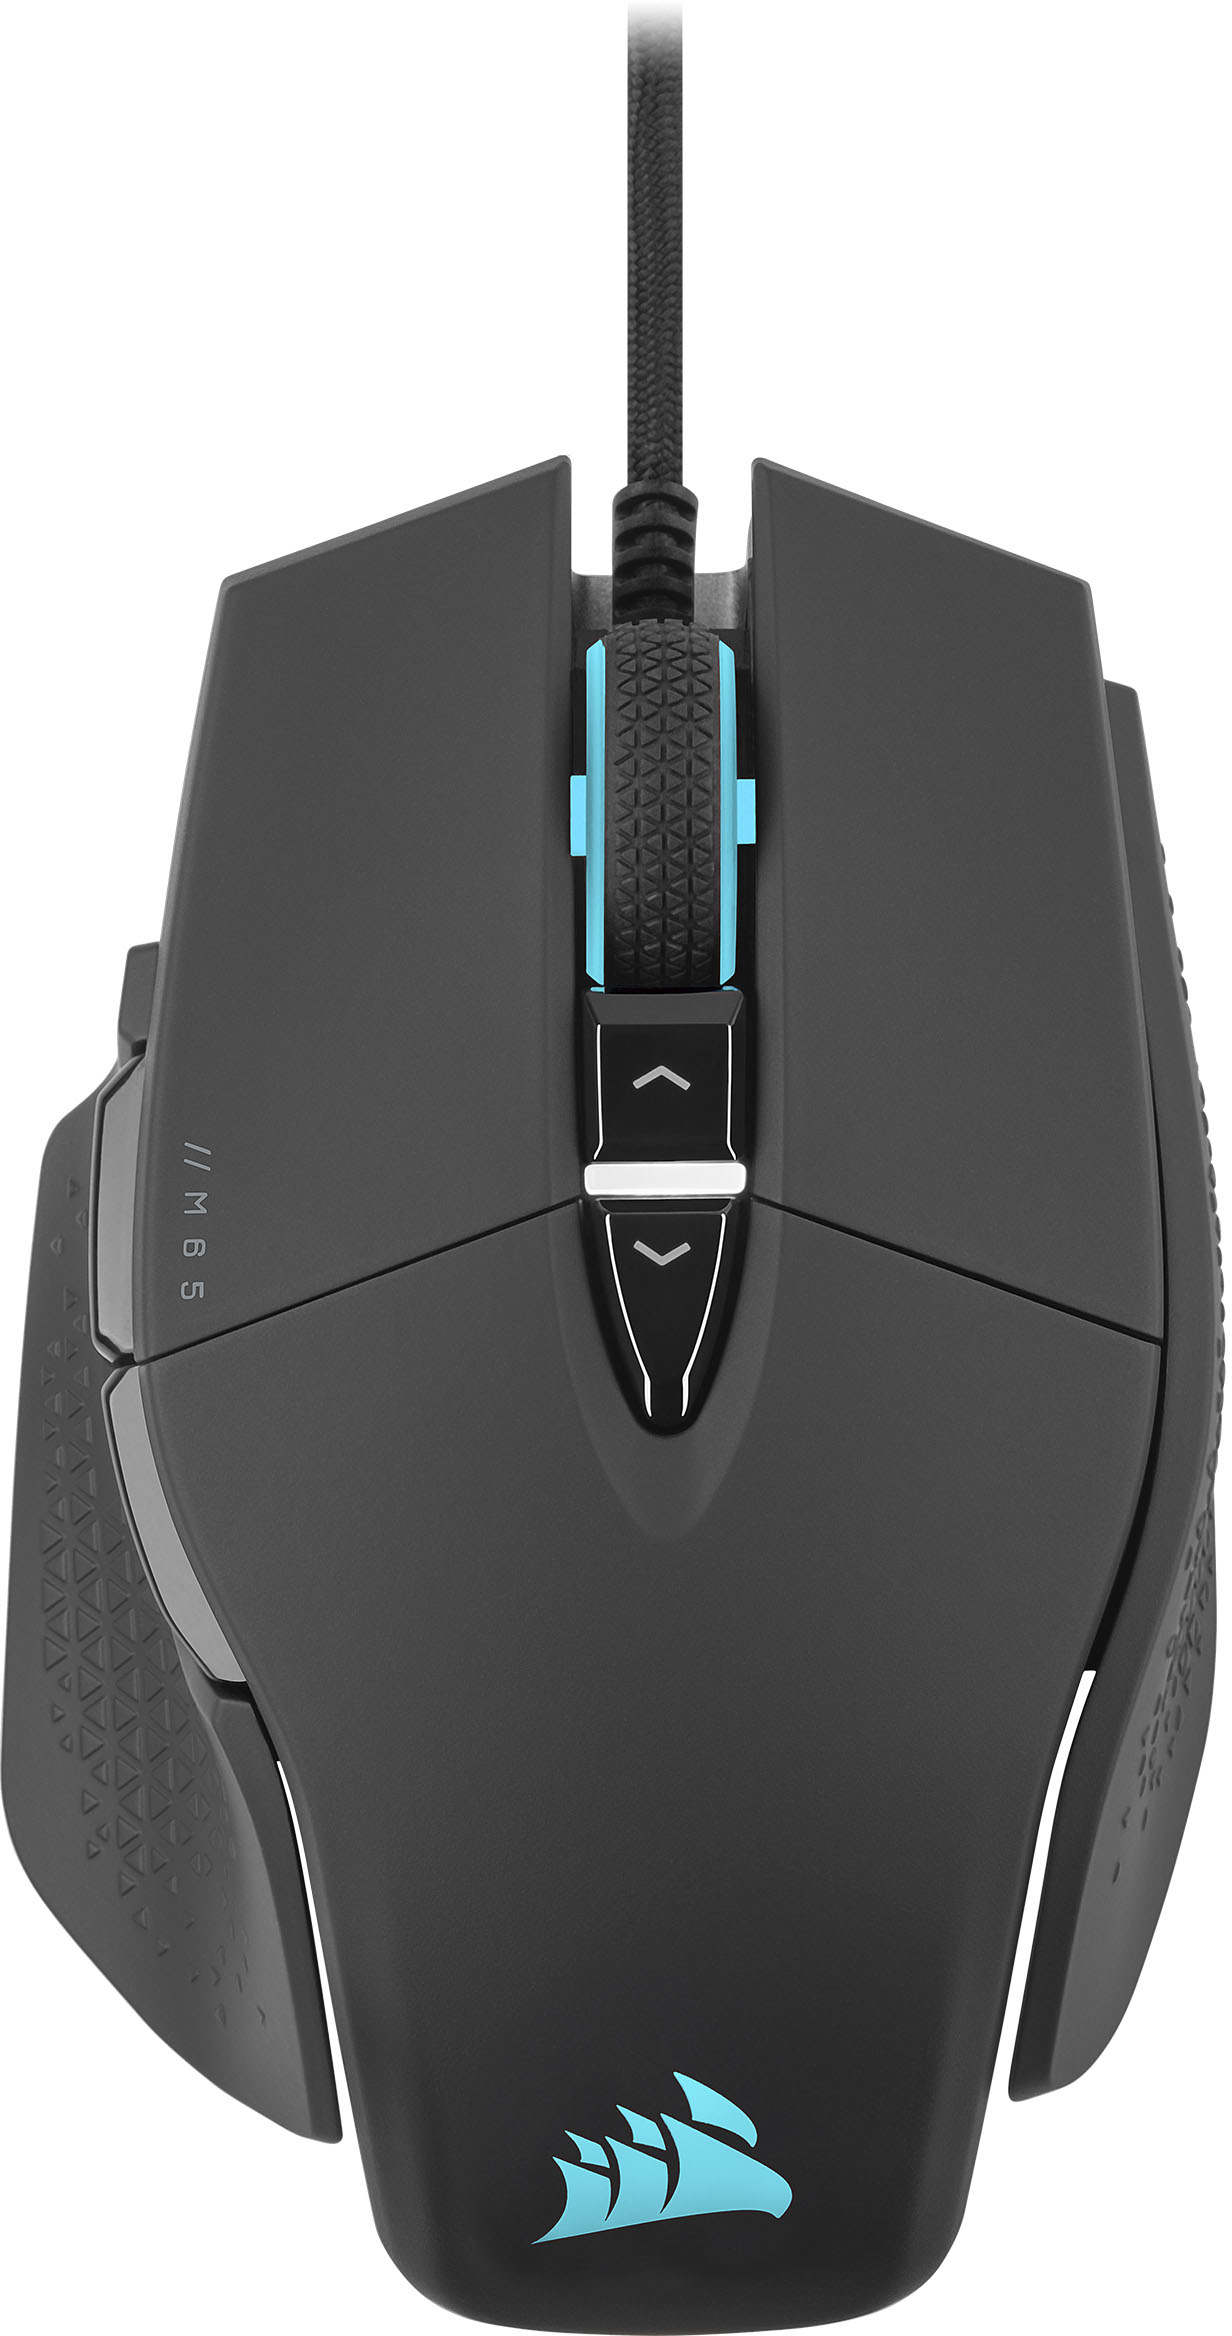 Mouse Black - Gaming Best CORSAIR RGB Weights with Ultra CH-9309411-NA2 Optical Adjustable M65 Wired Buy